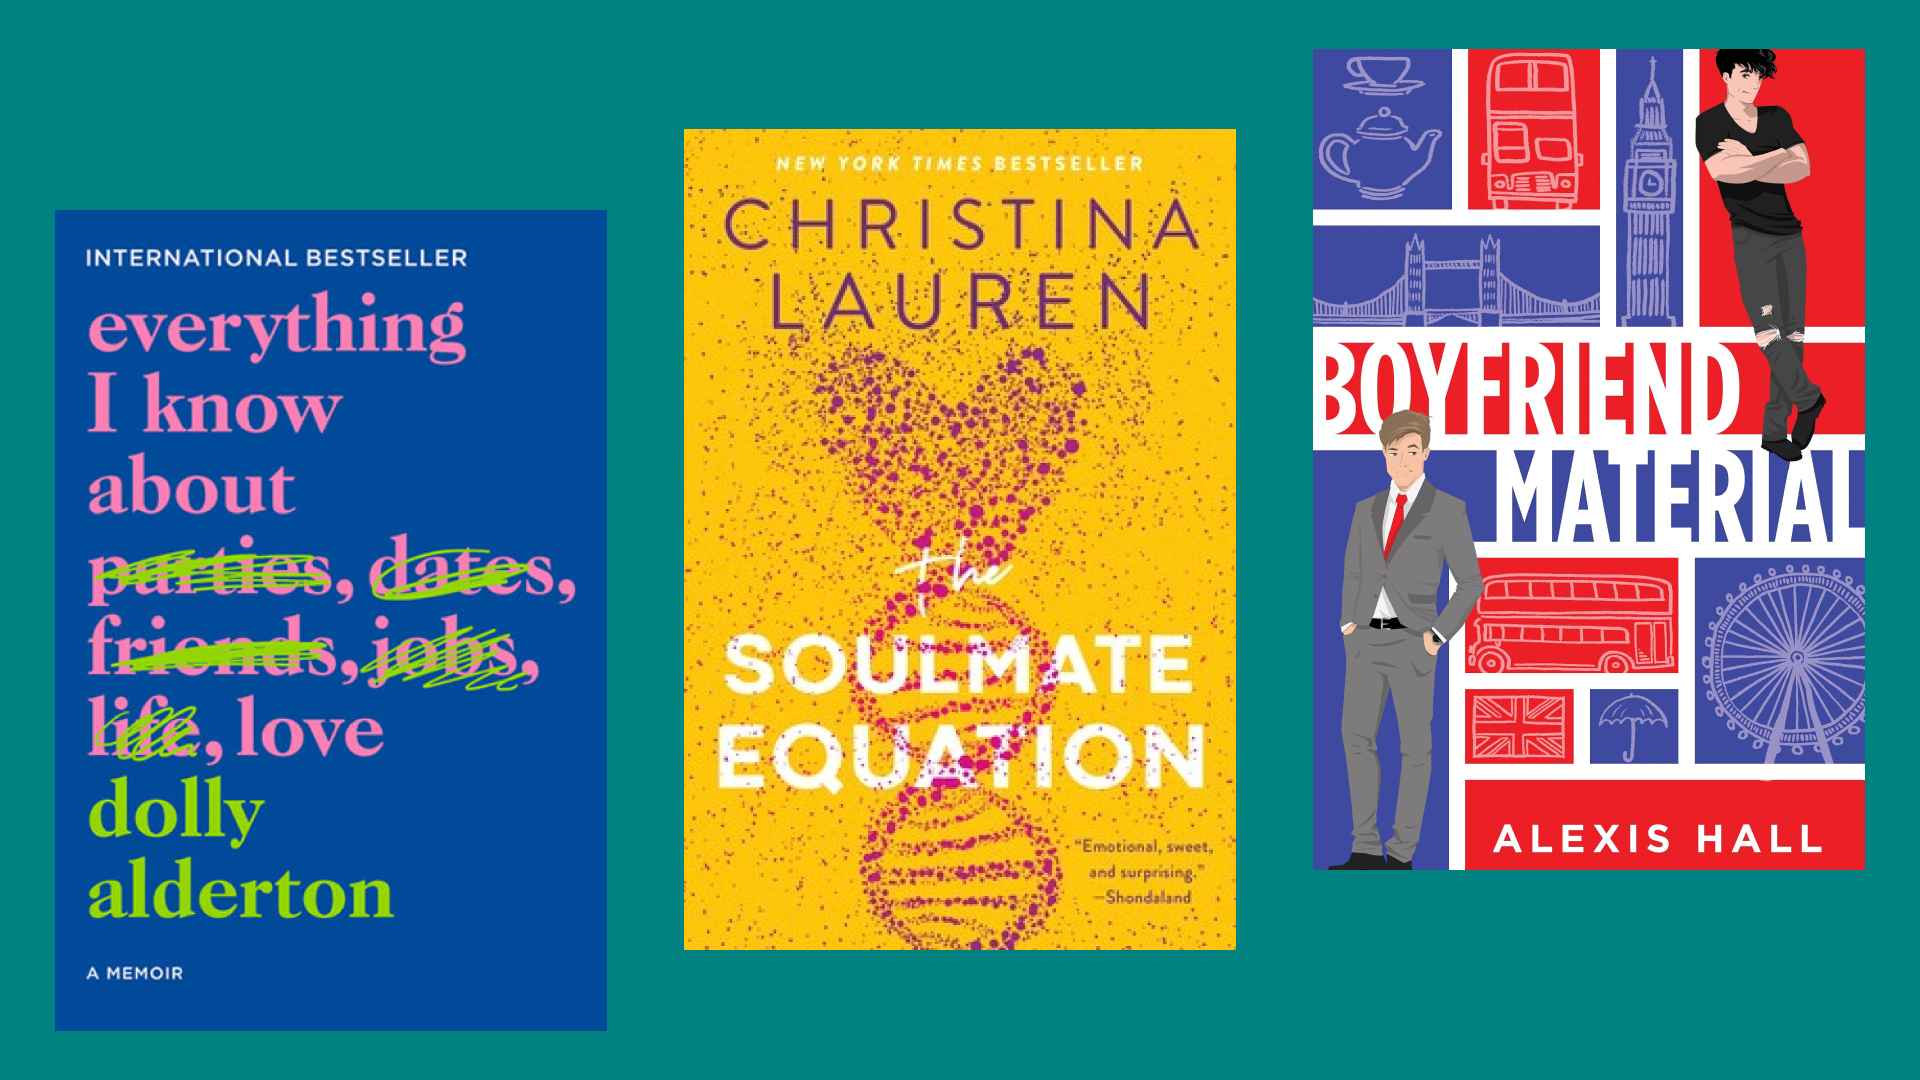 “Everything I Know About Love” by Dolly Alderton, “The Soulmate Equation” by Christina Lauren, “Boyfriend Material” by Alexis Hall